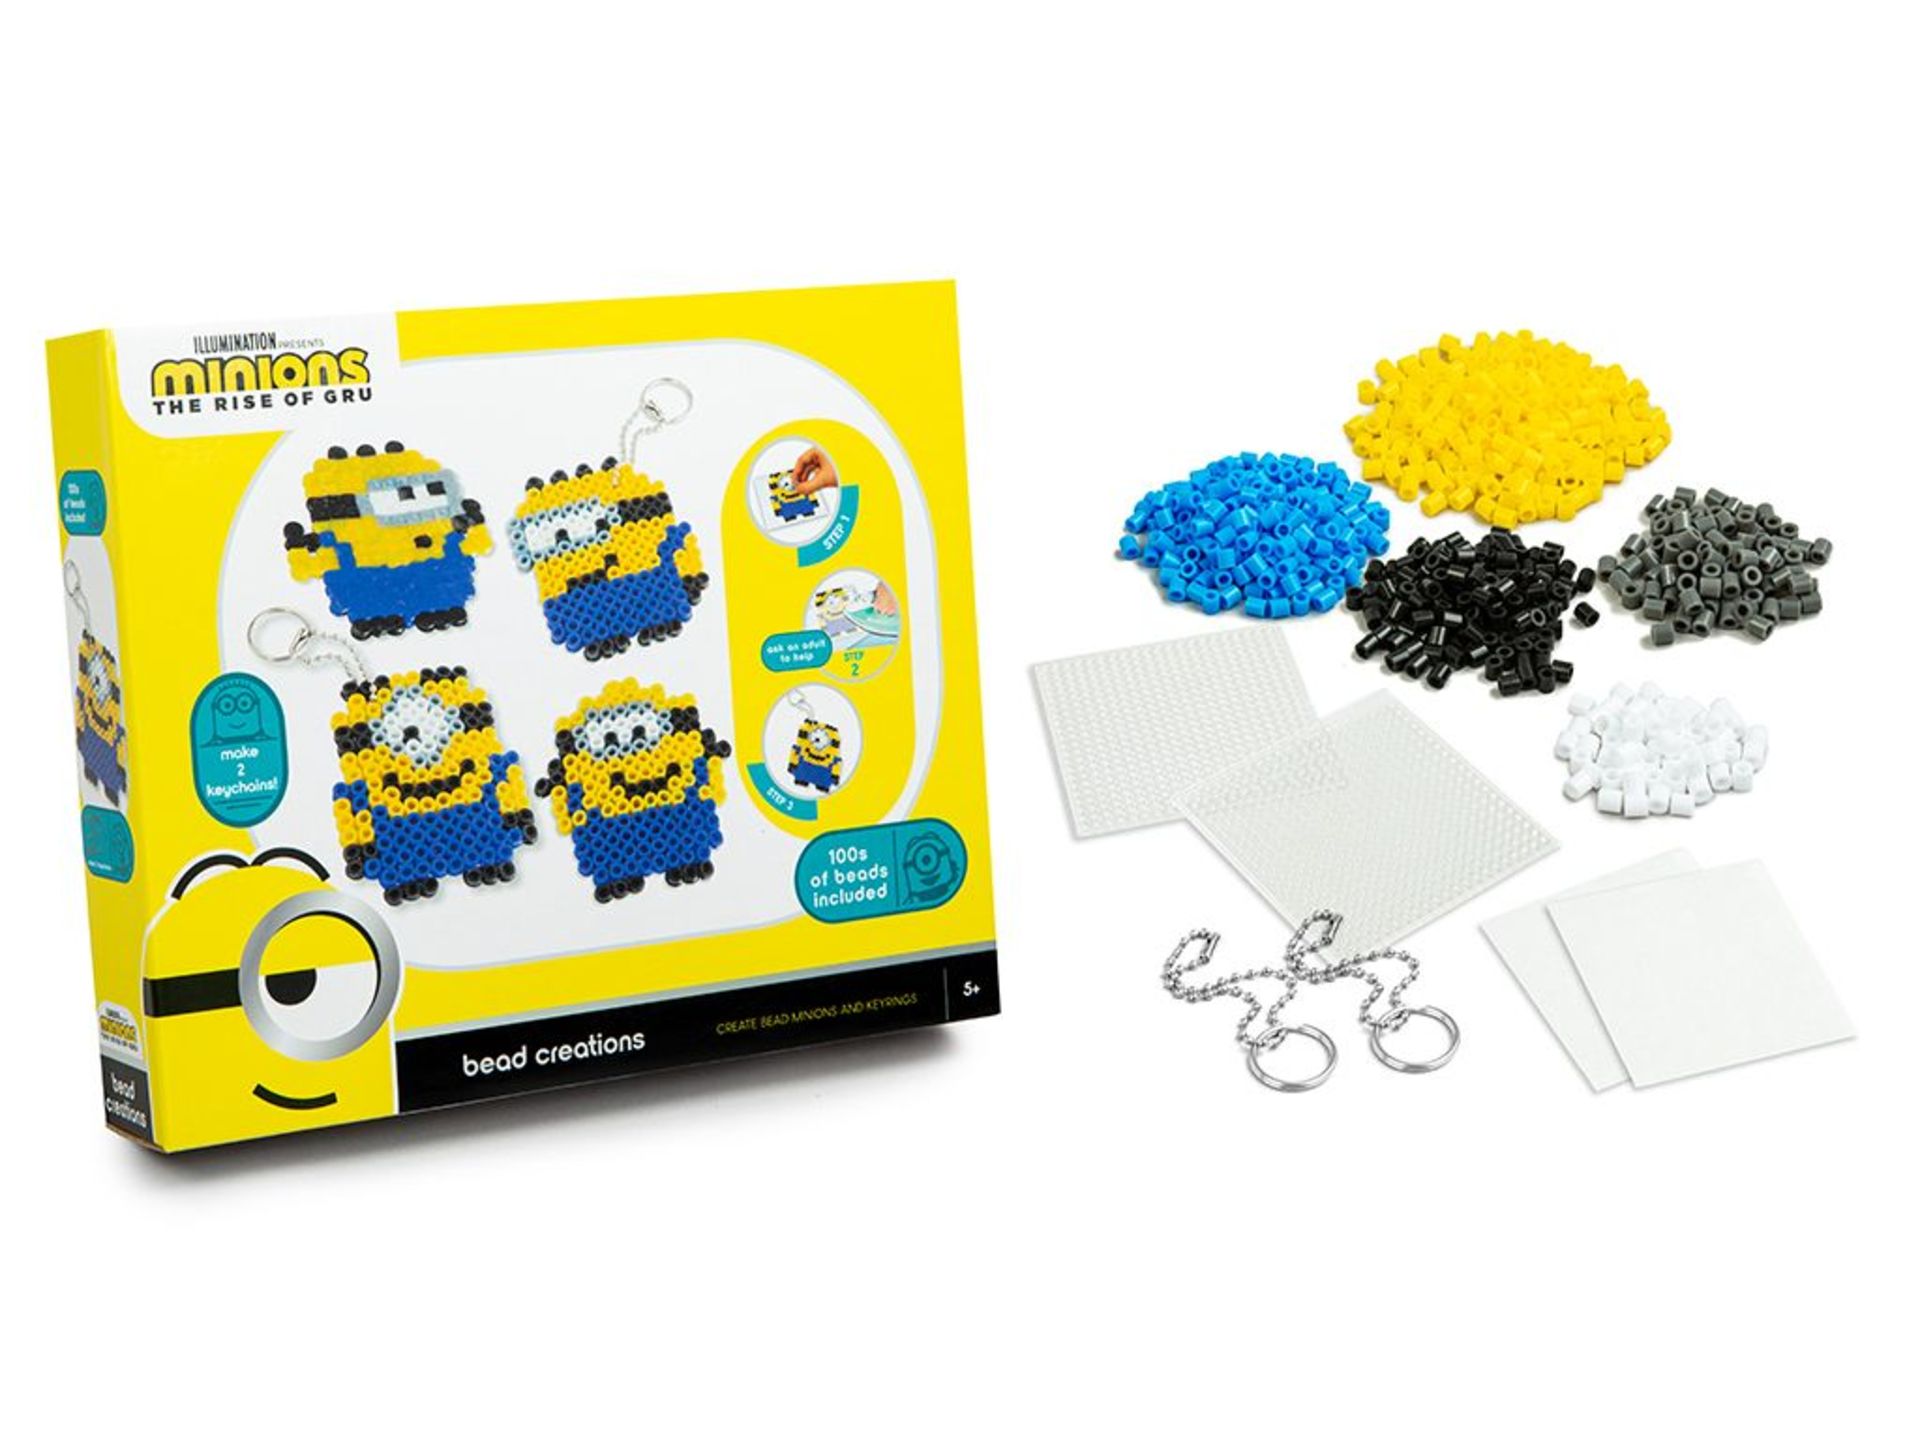 MINIONS THE RISE OF GREW BEAD CREATIONS INCLUDES 2 PEG BOARDS, 2 KEYRINGS, 2 IRONING SHEETS & 100